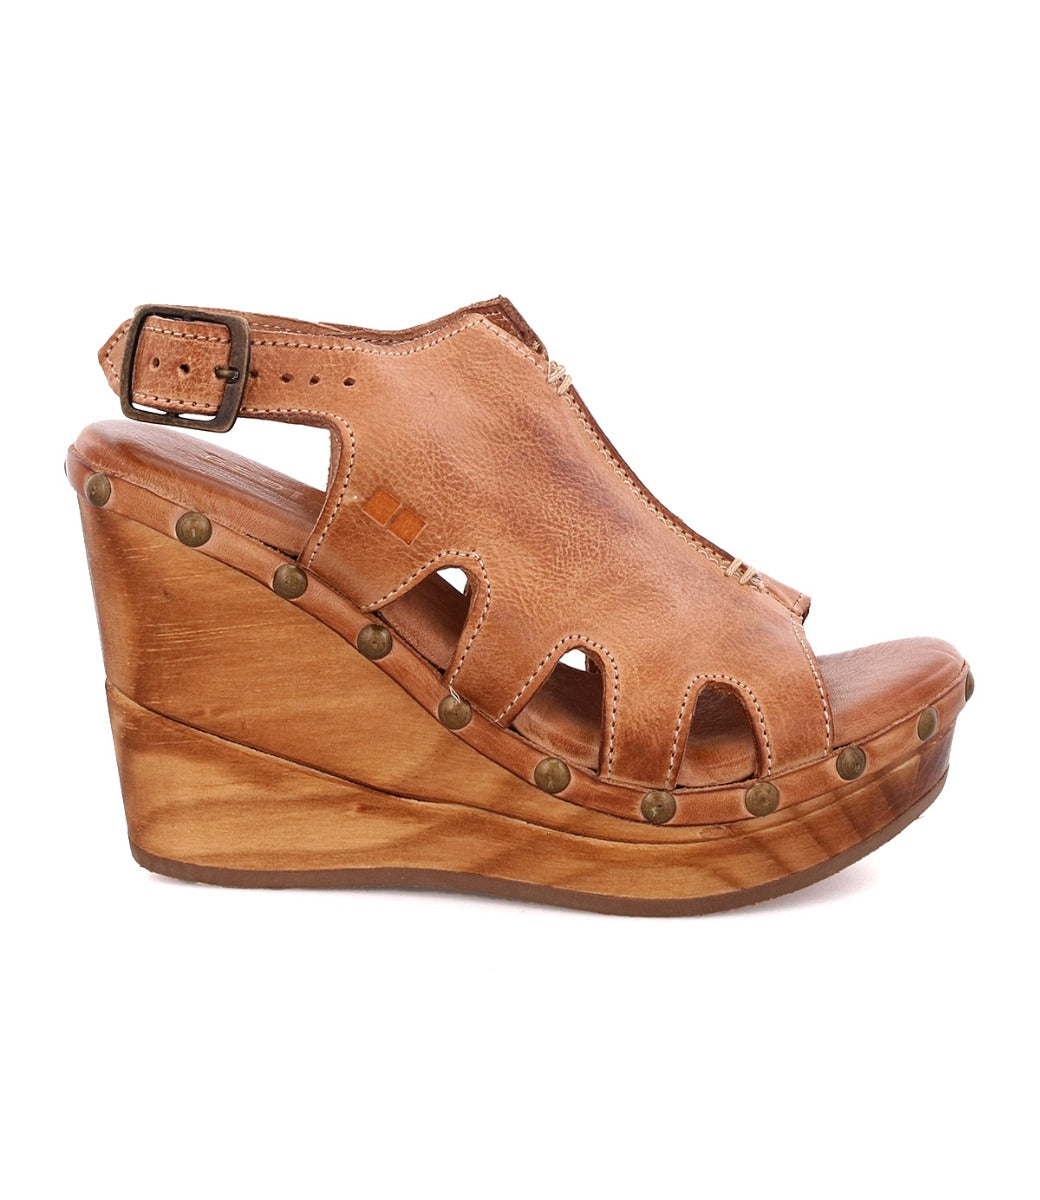 A women's Naiya wedge sandal with wooden wedges, by Bed Stu.